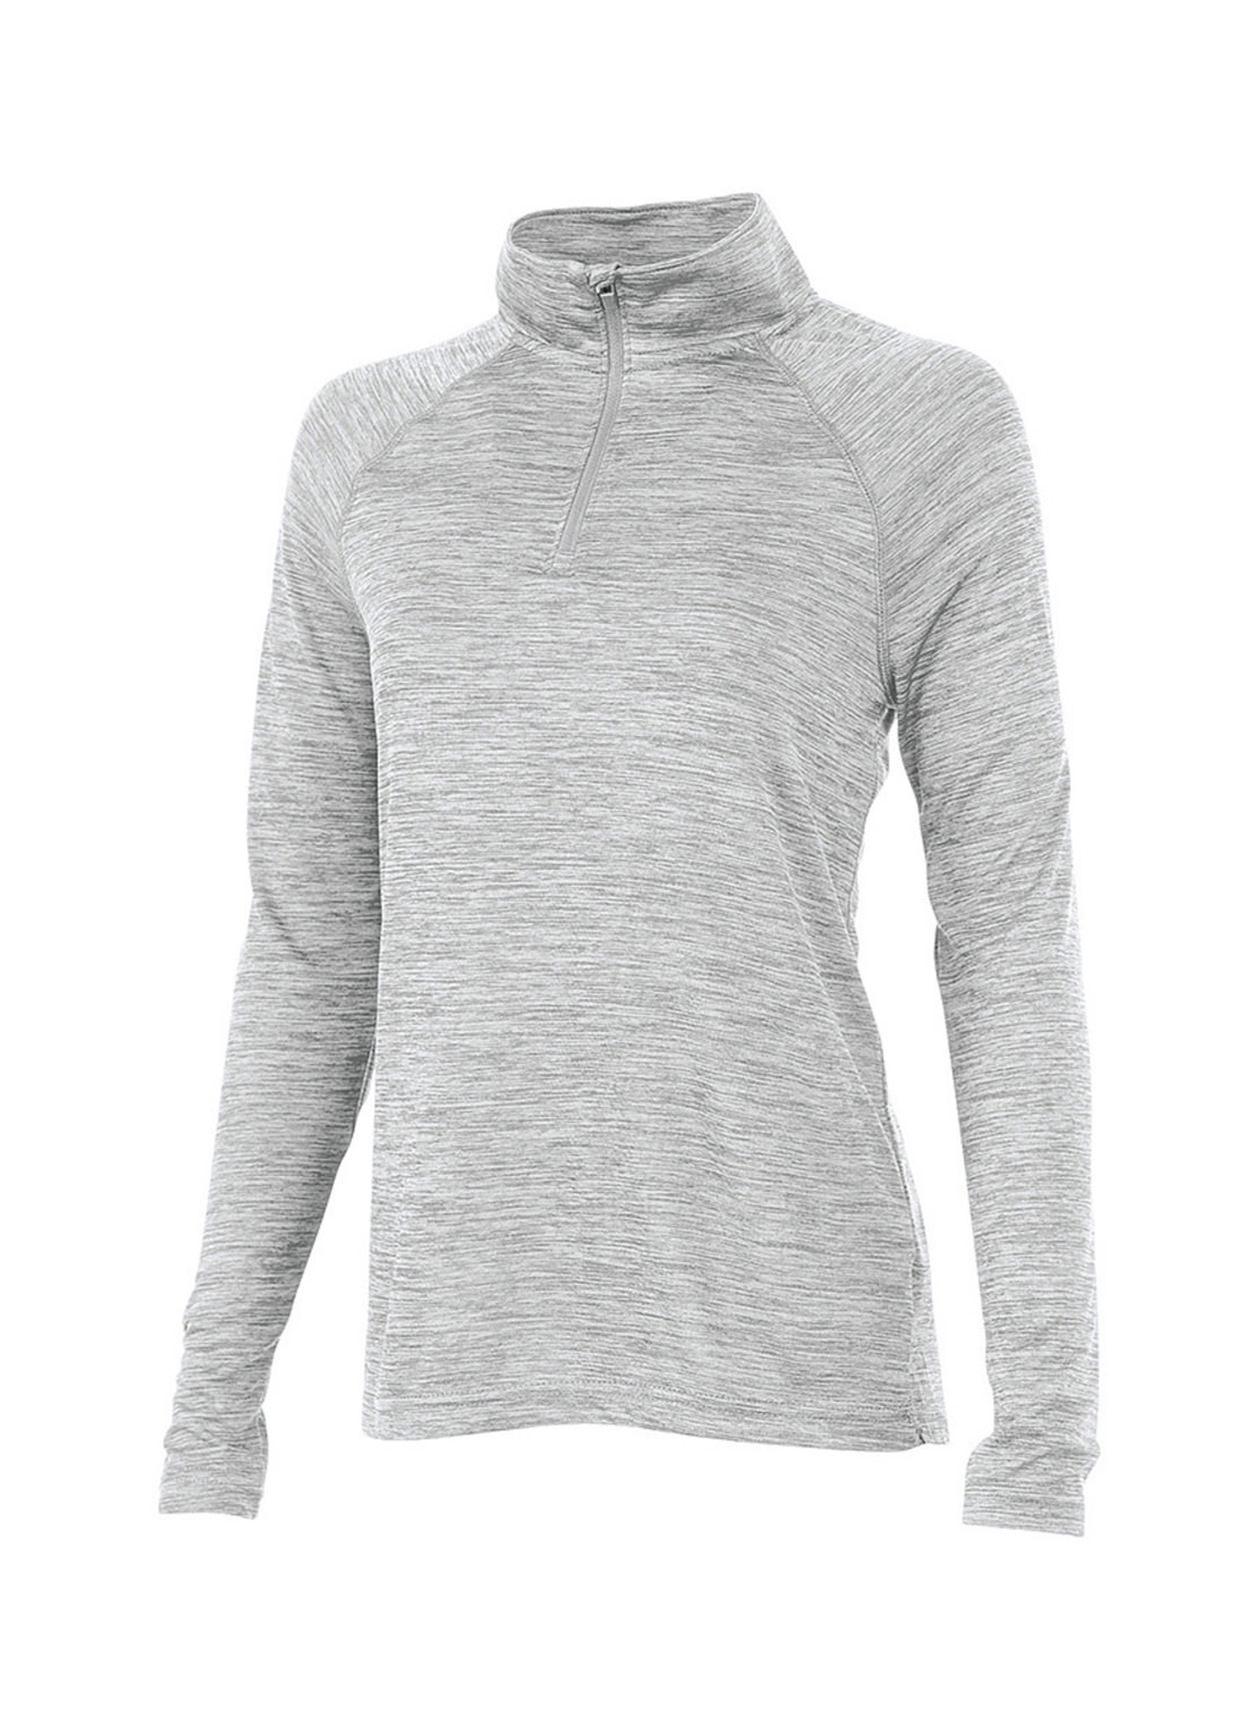 Charles River Women's Grey Space Dyed Quarter-Zip